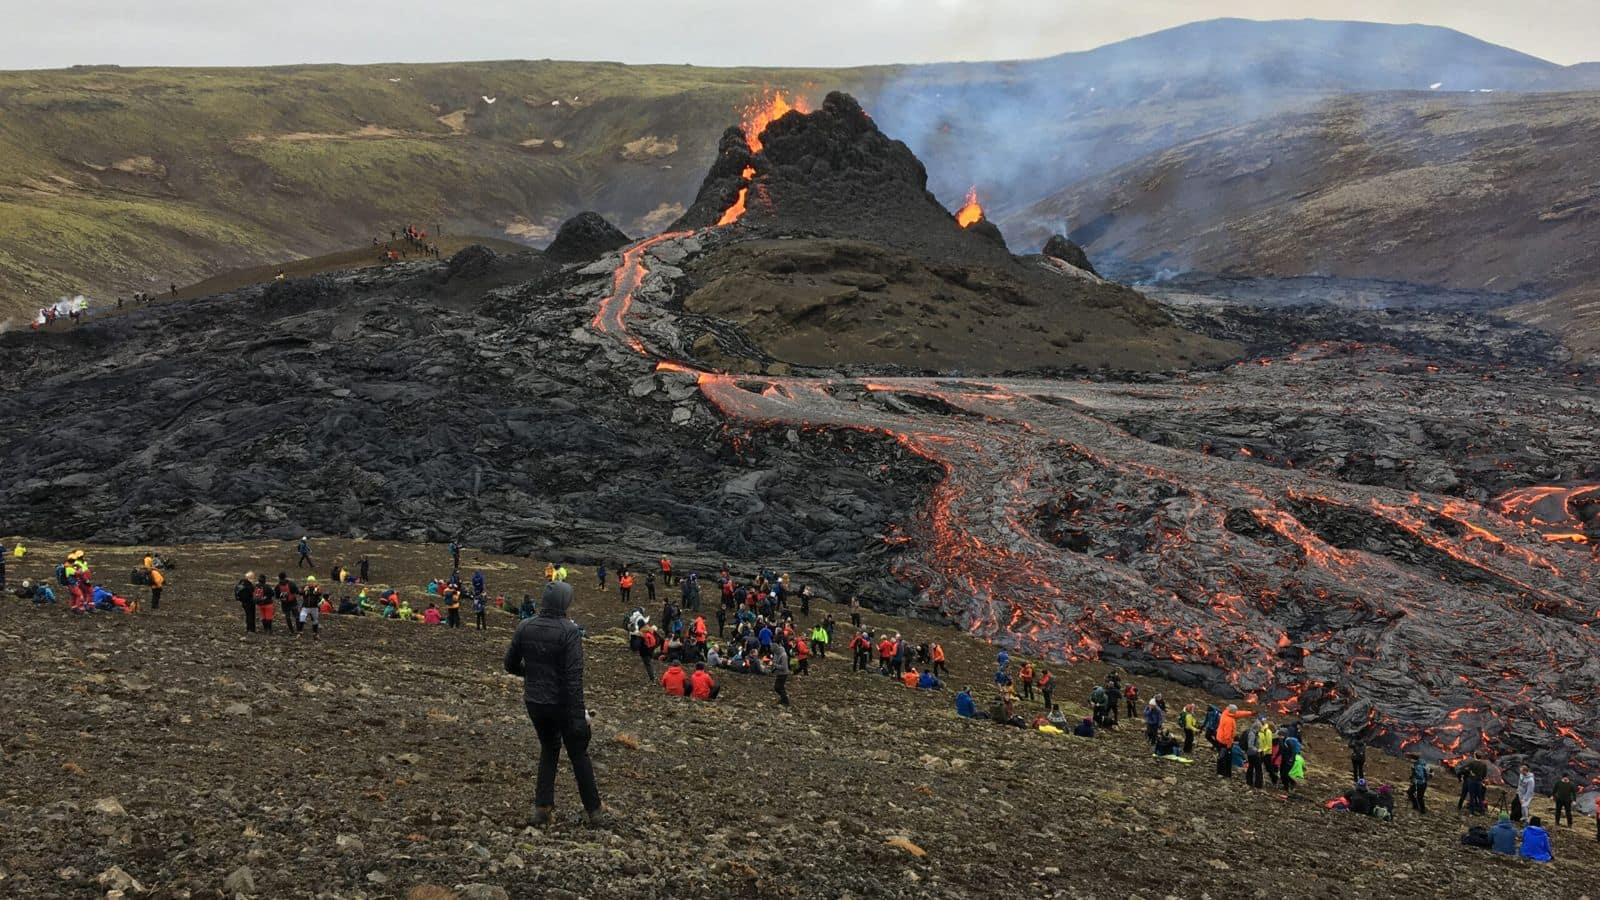 Trek the fire and ice of Reykjanes, Iceland: A guide